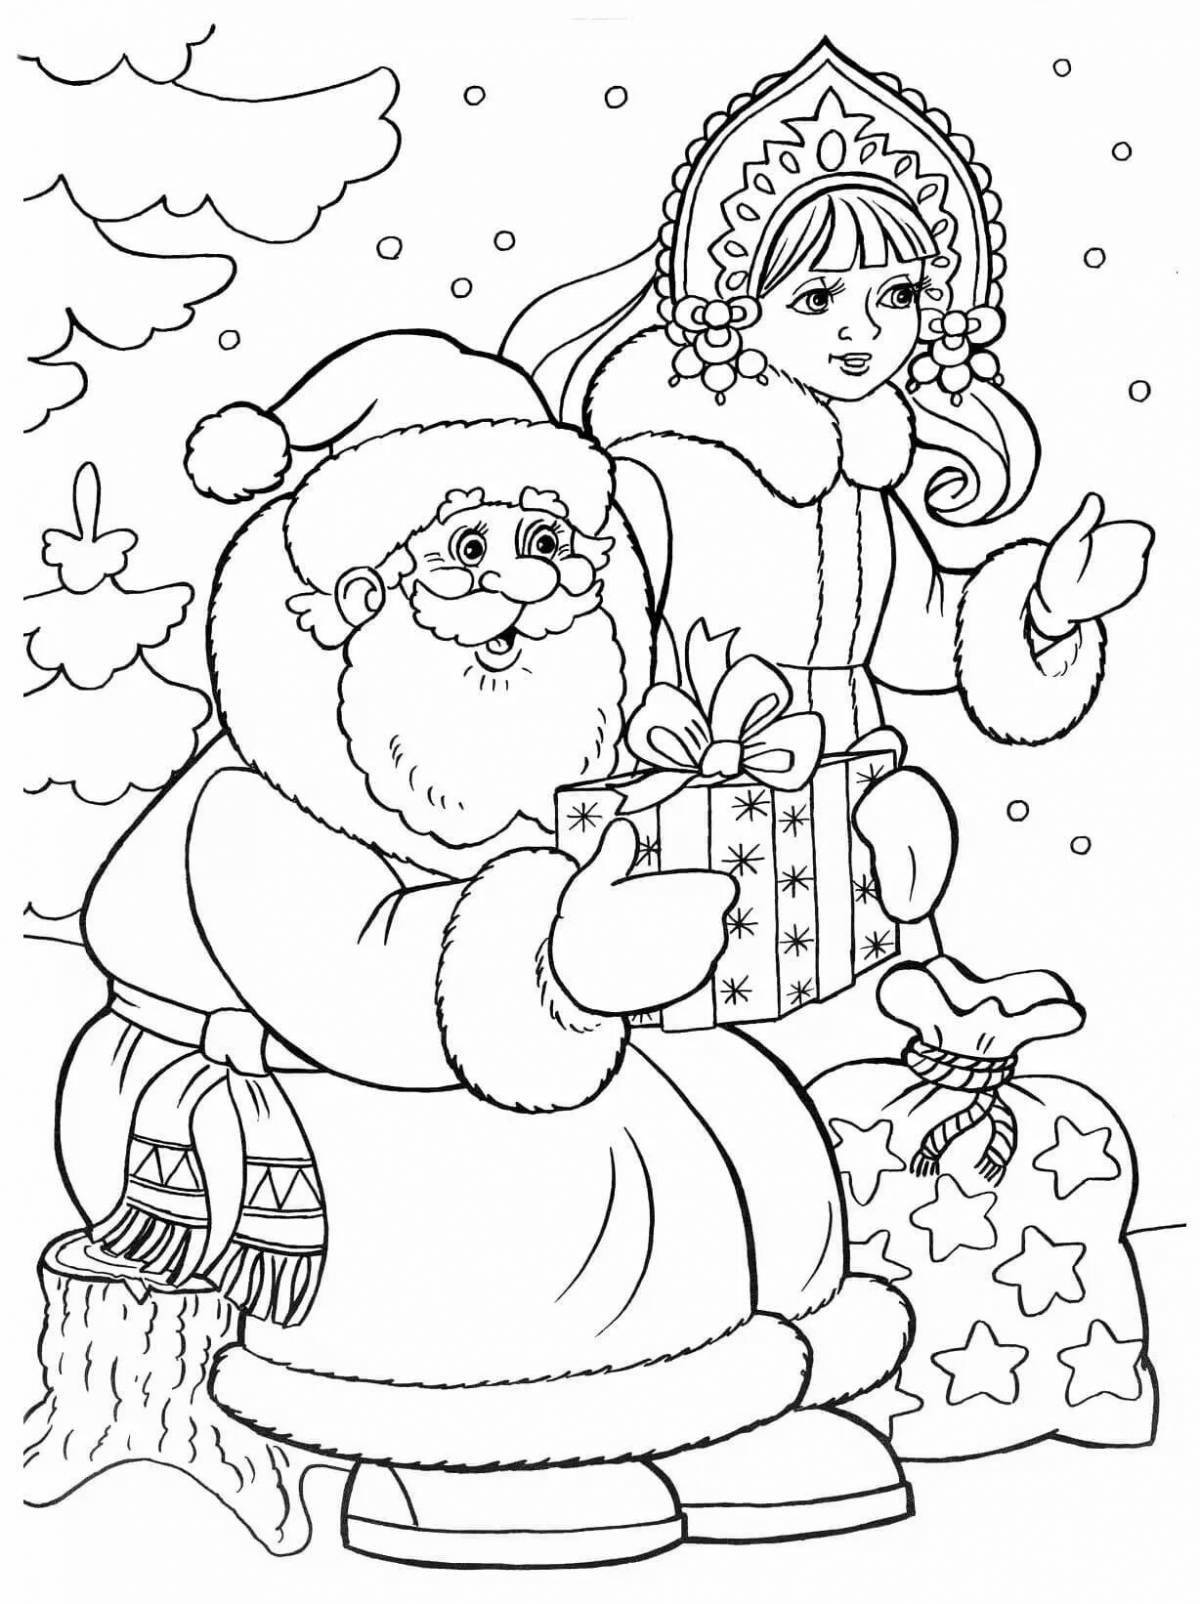 Funny santa claus coloring book for kids 2-3 years old